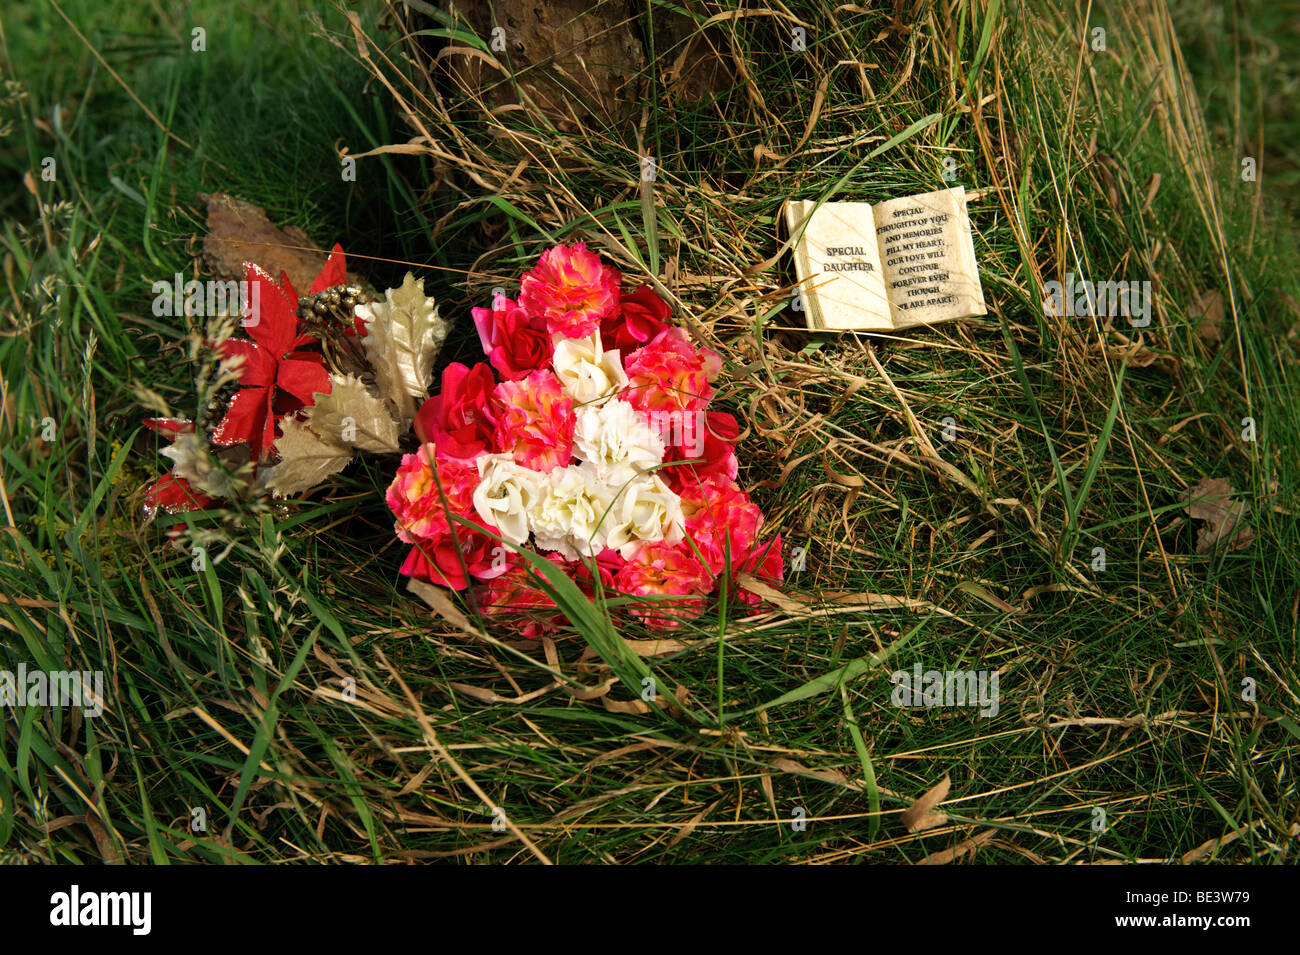 Arrangement of flowers on the ground left as a floral tribute to a dead daughter, UK Stock Photo